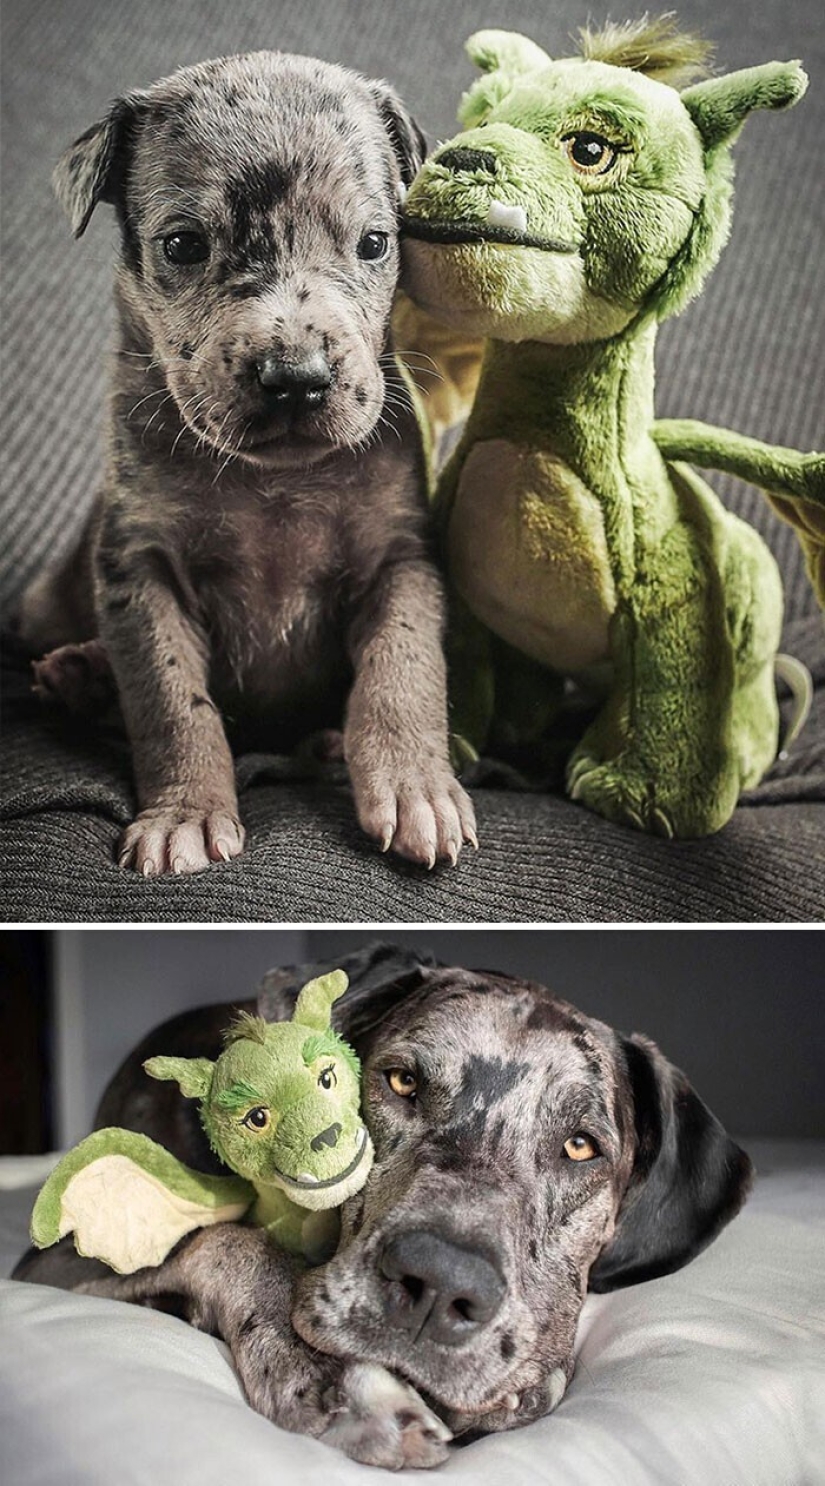 How fast they grow: 30 photos with dogs in the style of "then and now"